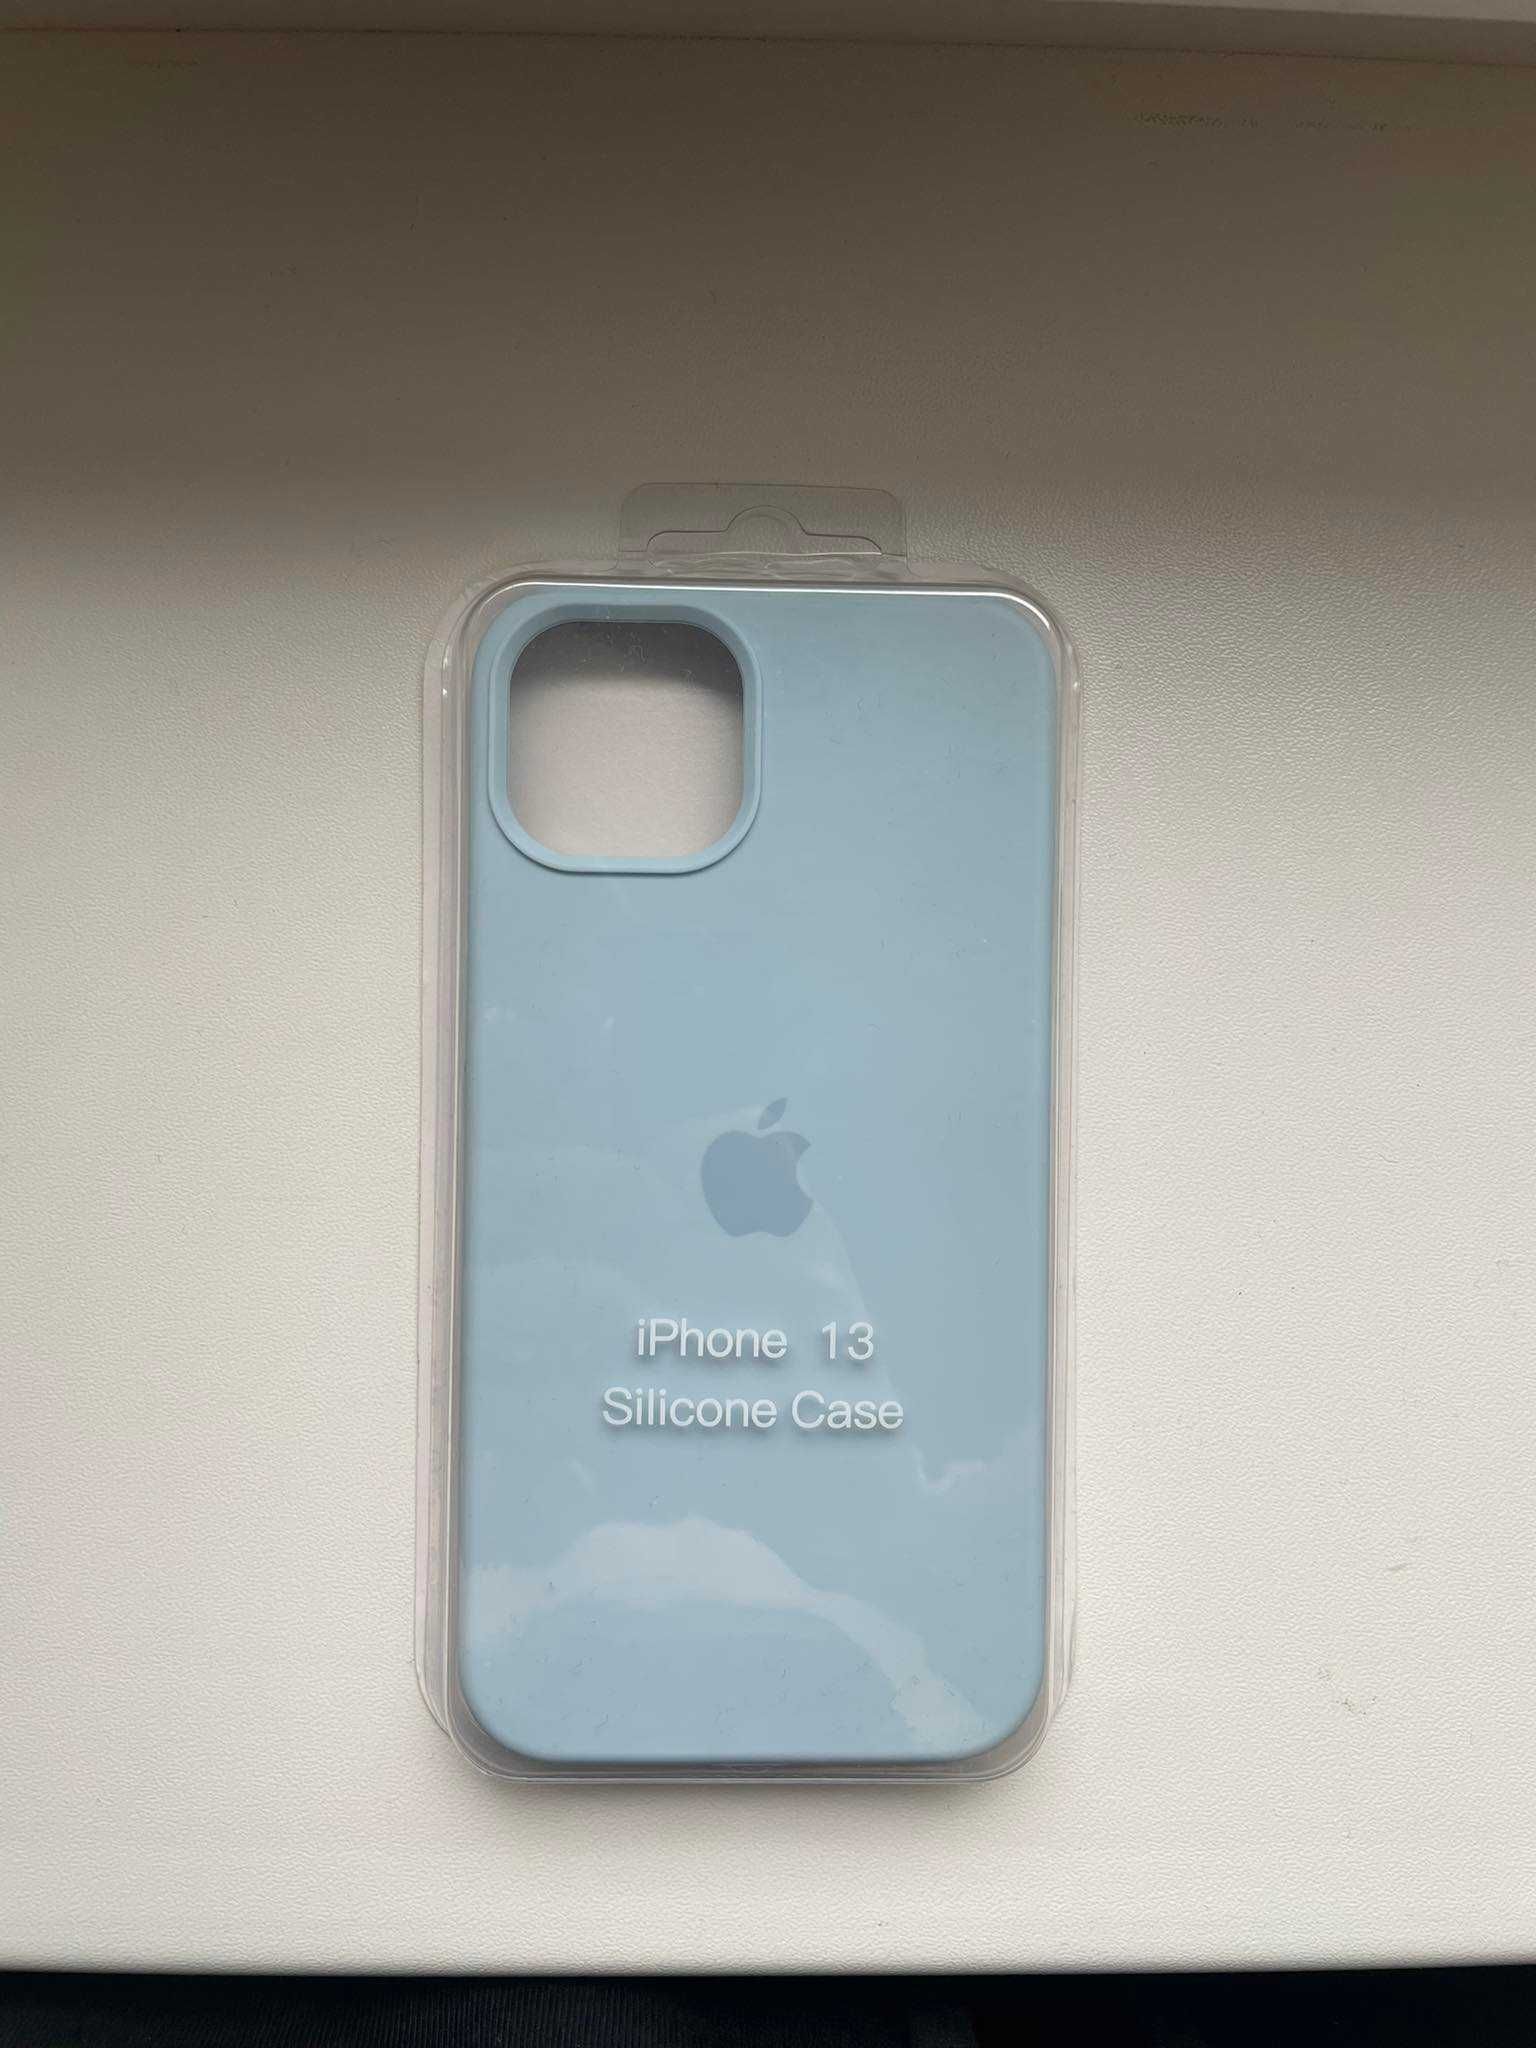 Case Etui Silicon Case Iphone 13 Baby Blue NOWY